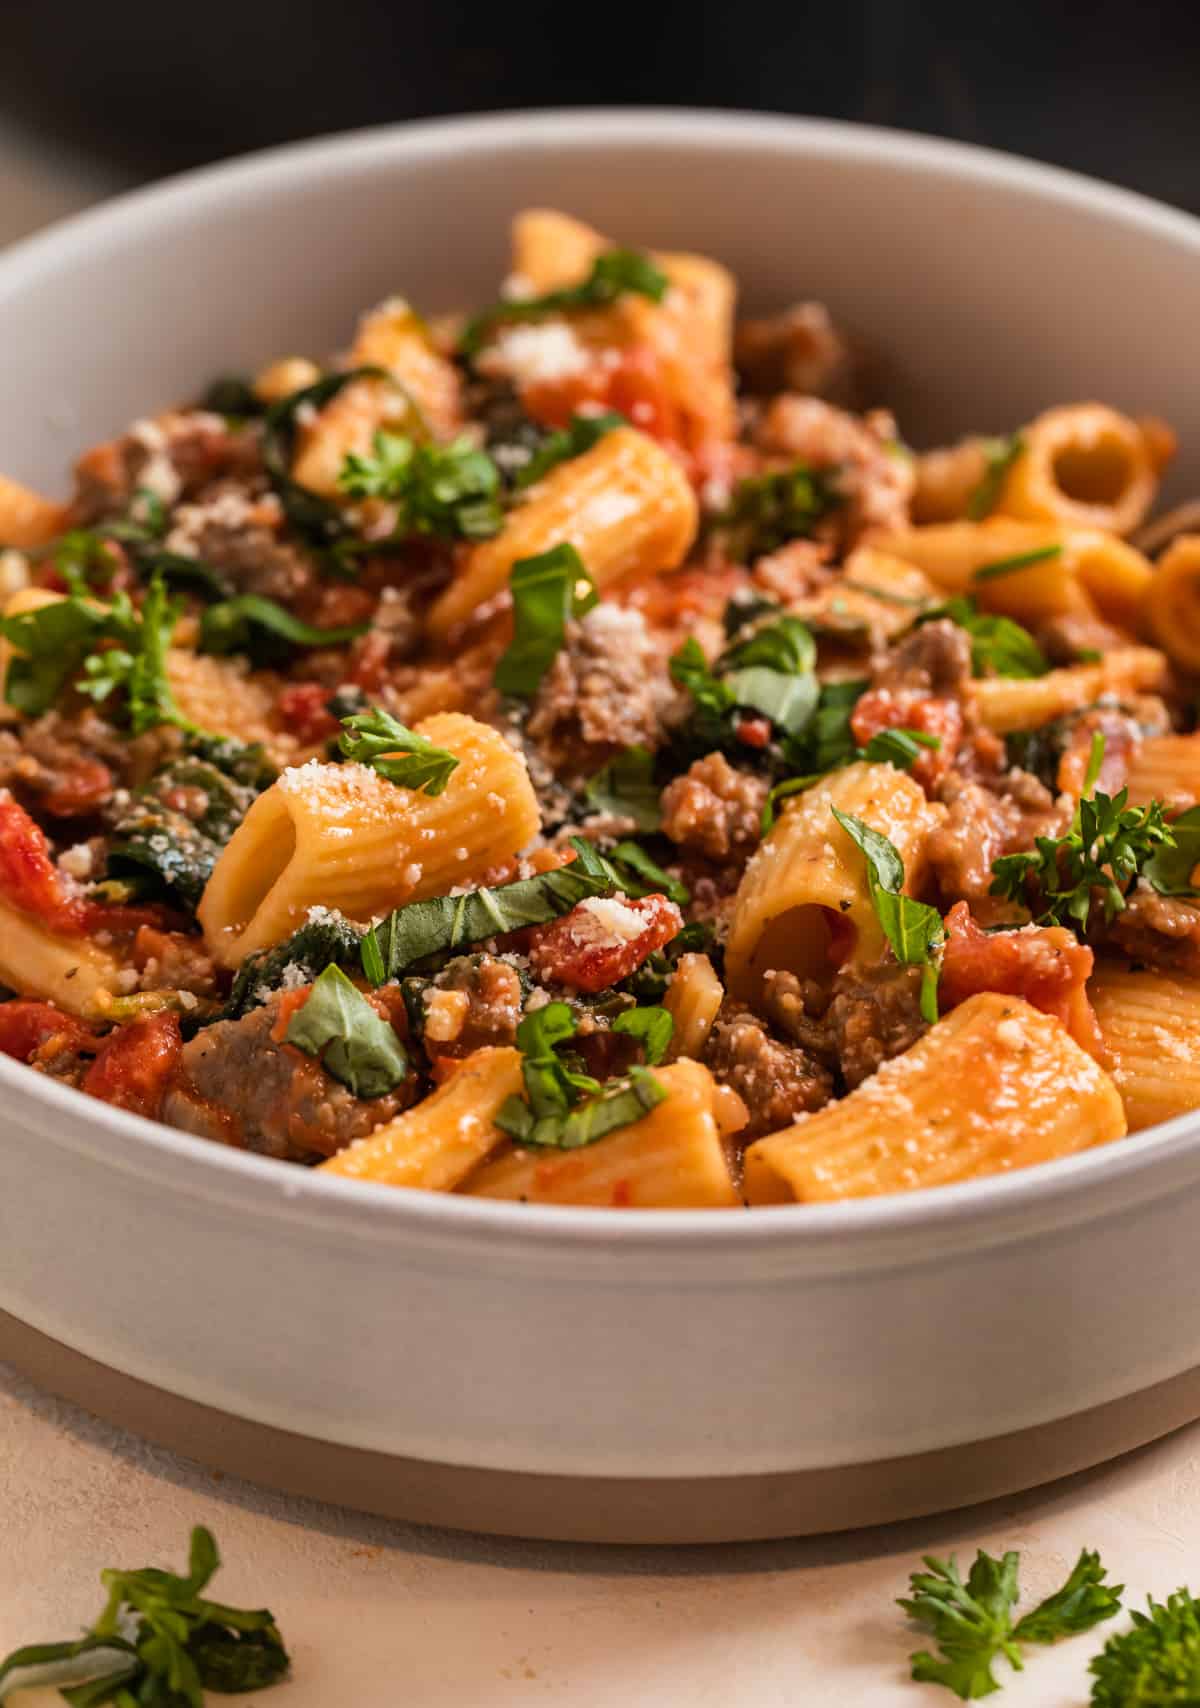 Bowl of spicy pasta Italian sausage pasta topped with chopped parsley and basil.